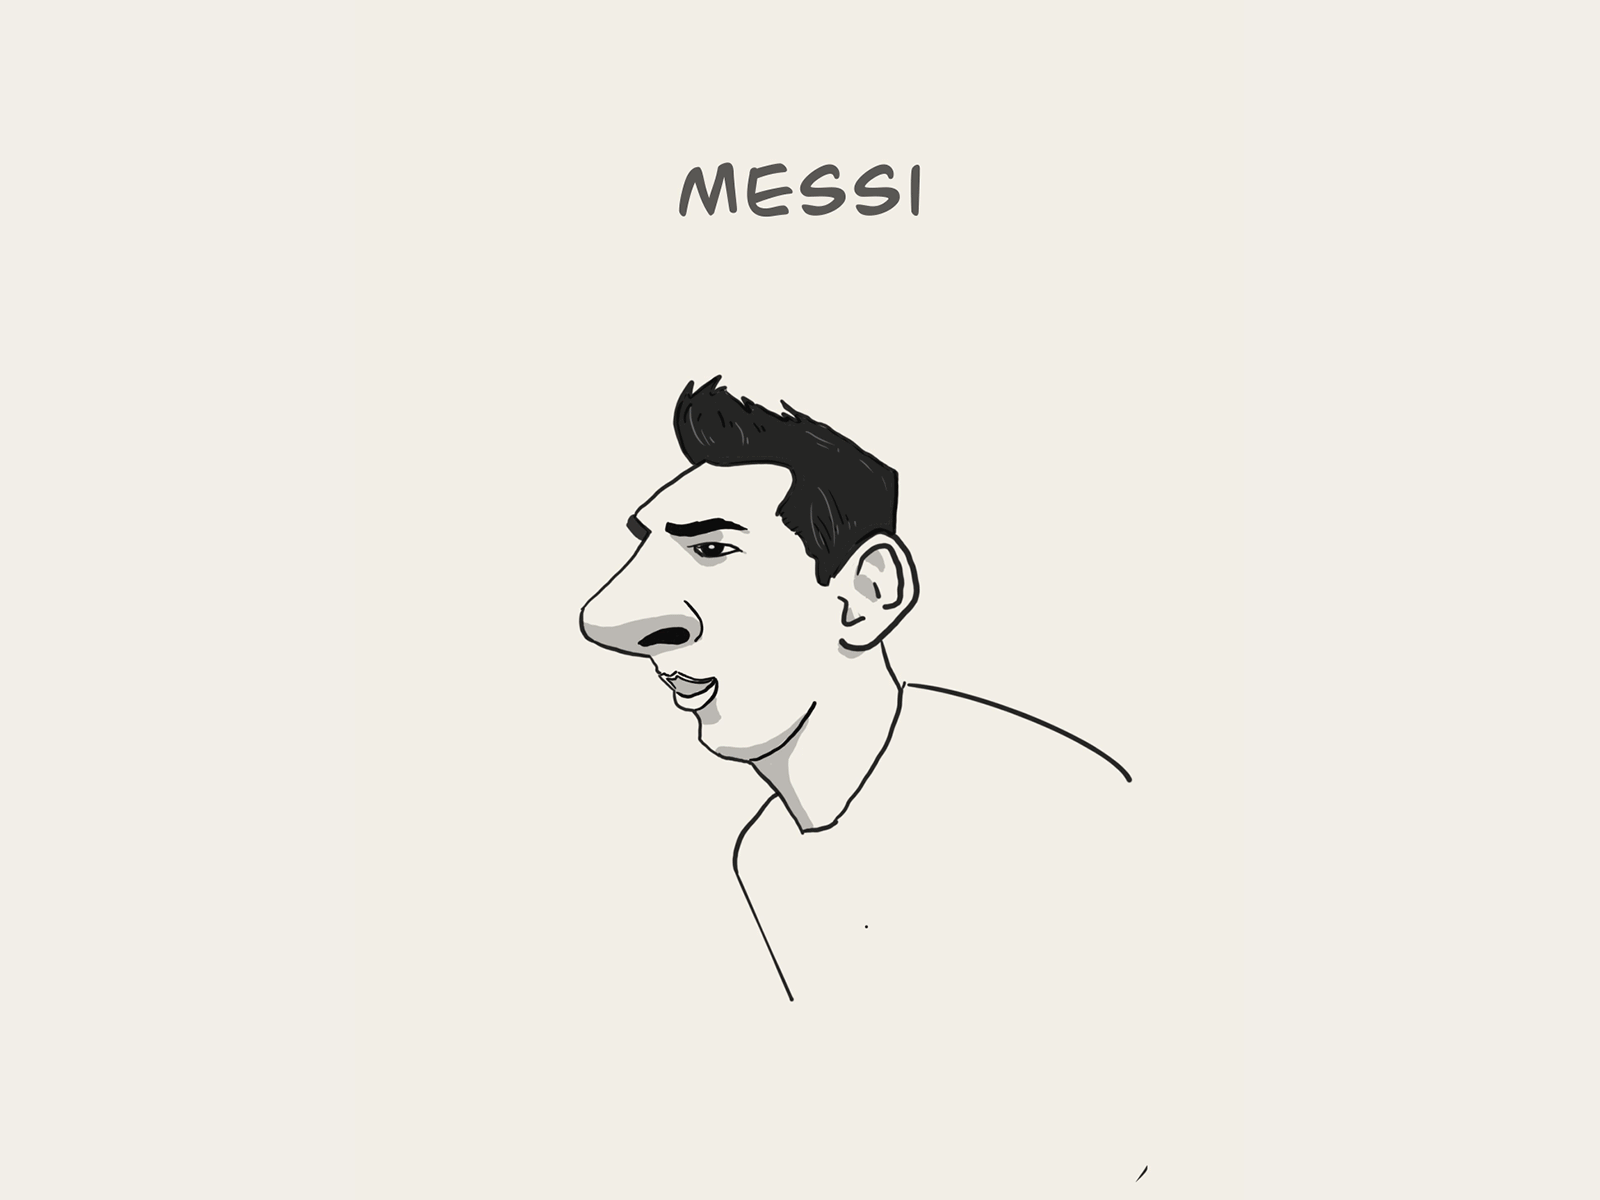 Lionel messi turns 34 animation branding character design draw football graphic design illustration illustration art lineart lionel messi messi minimal sketch